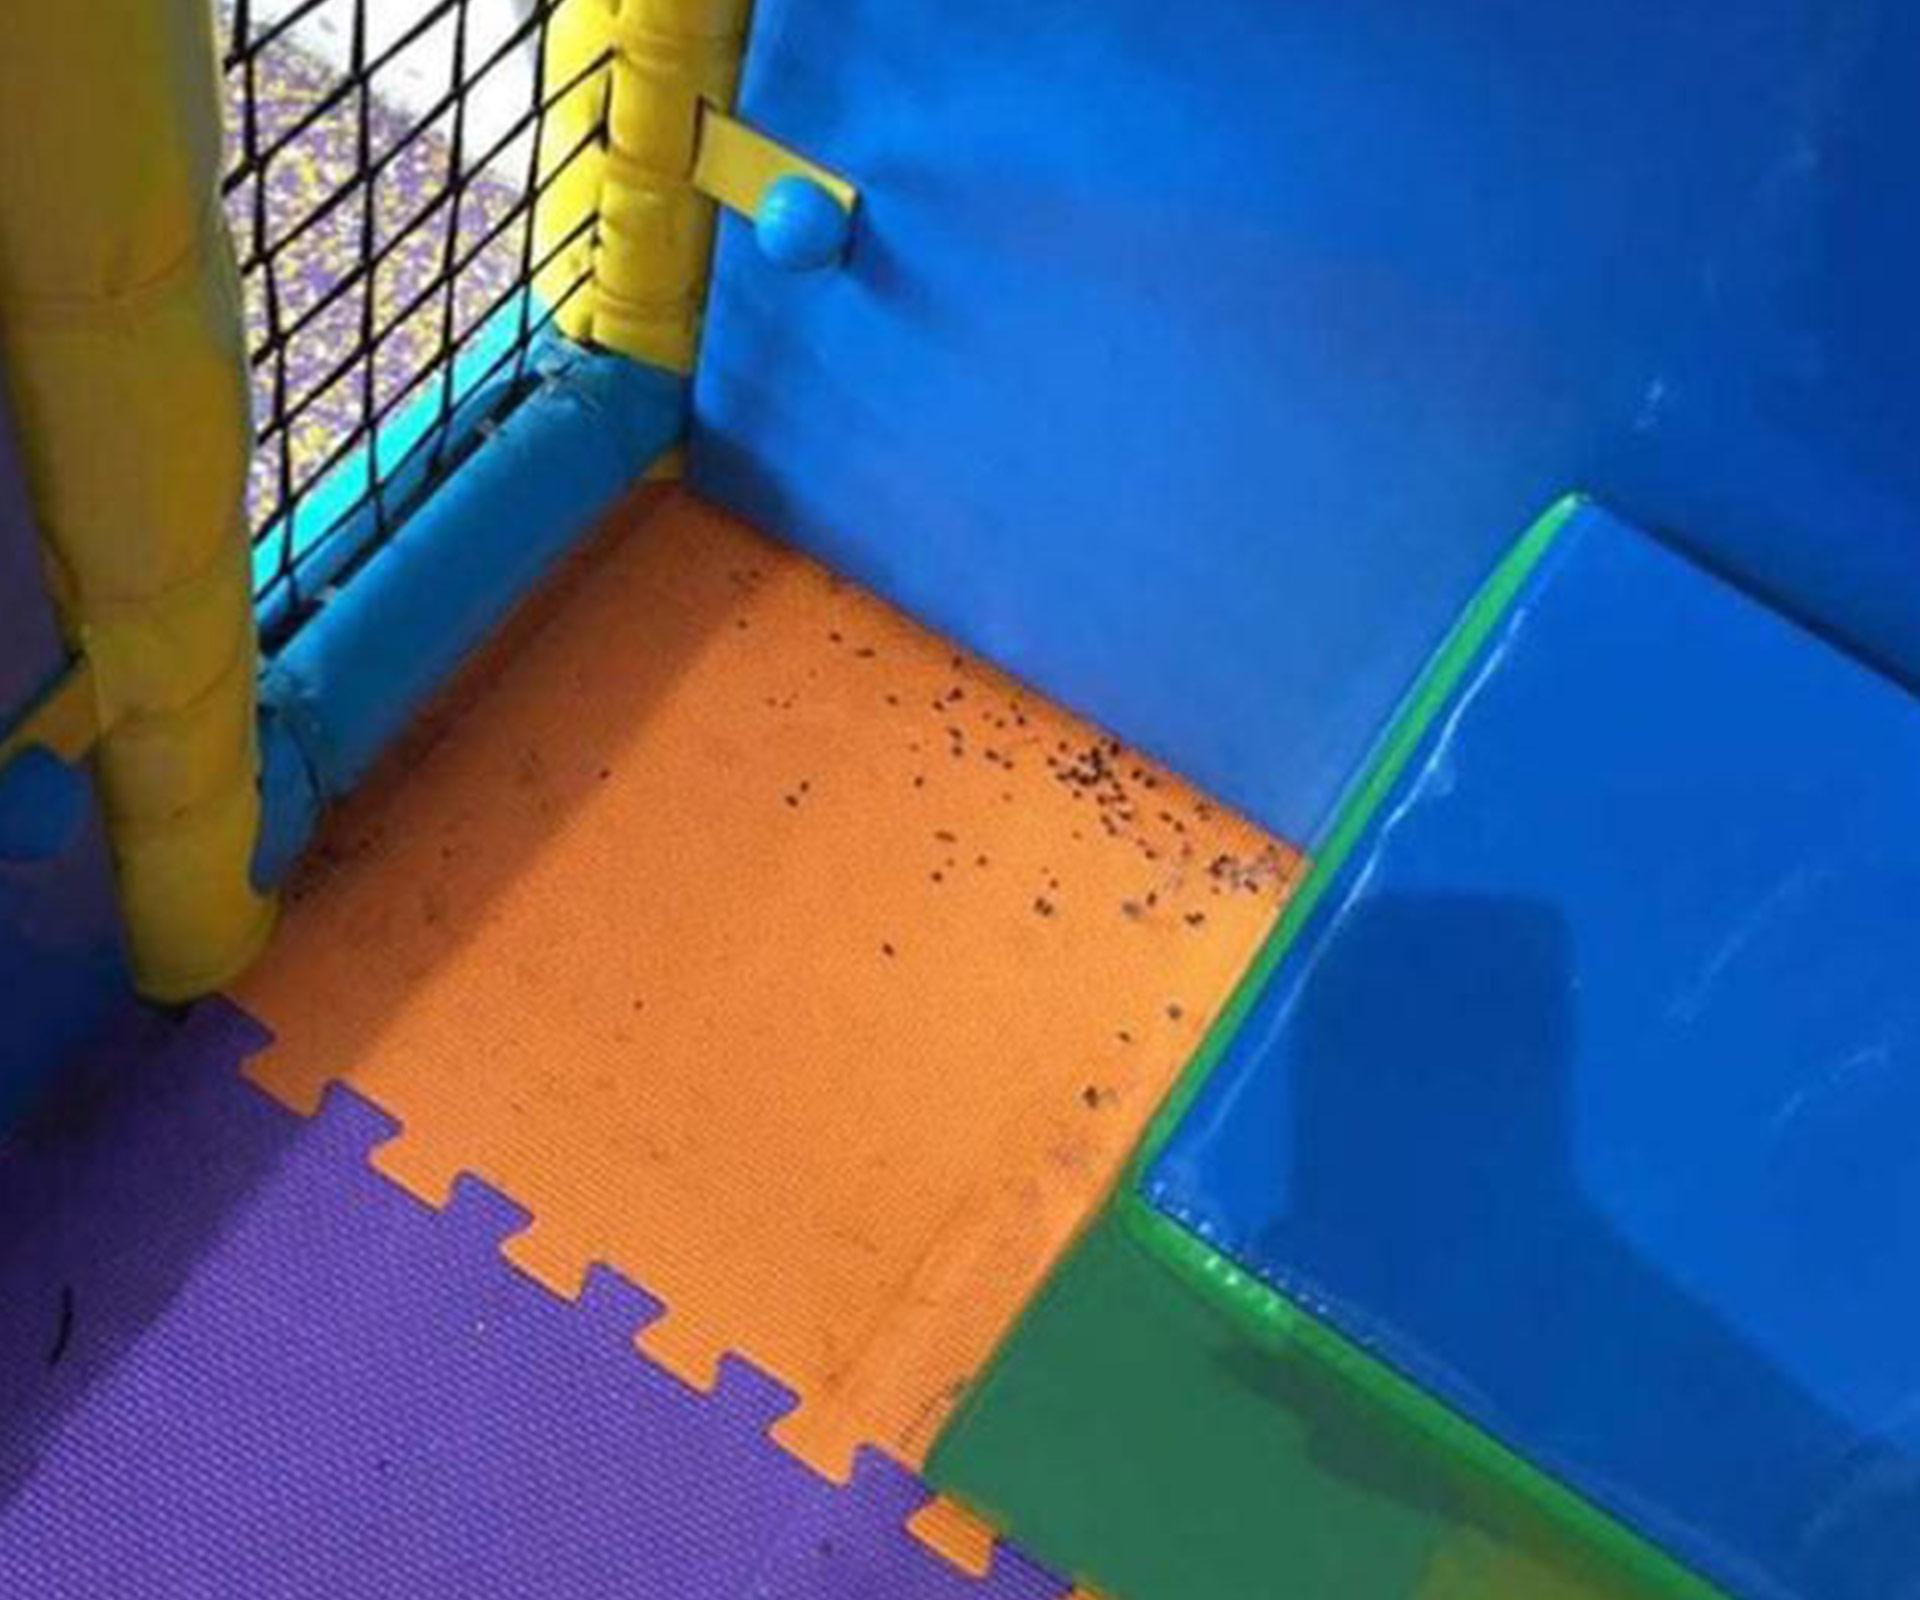 Melbourne mum finds rat droppings